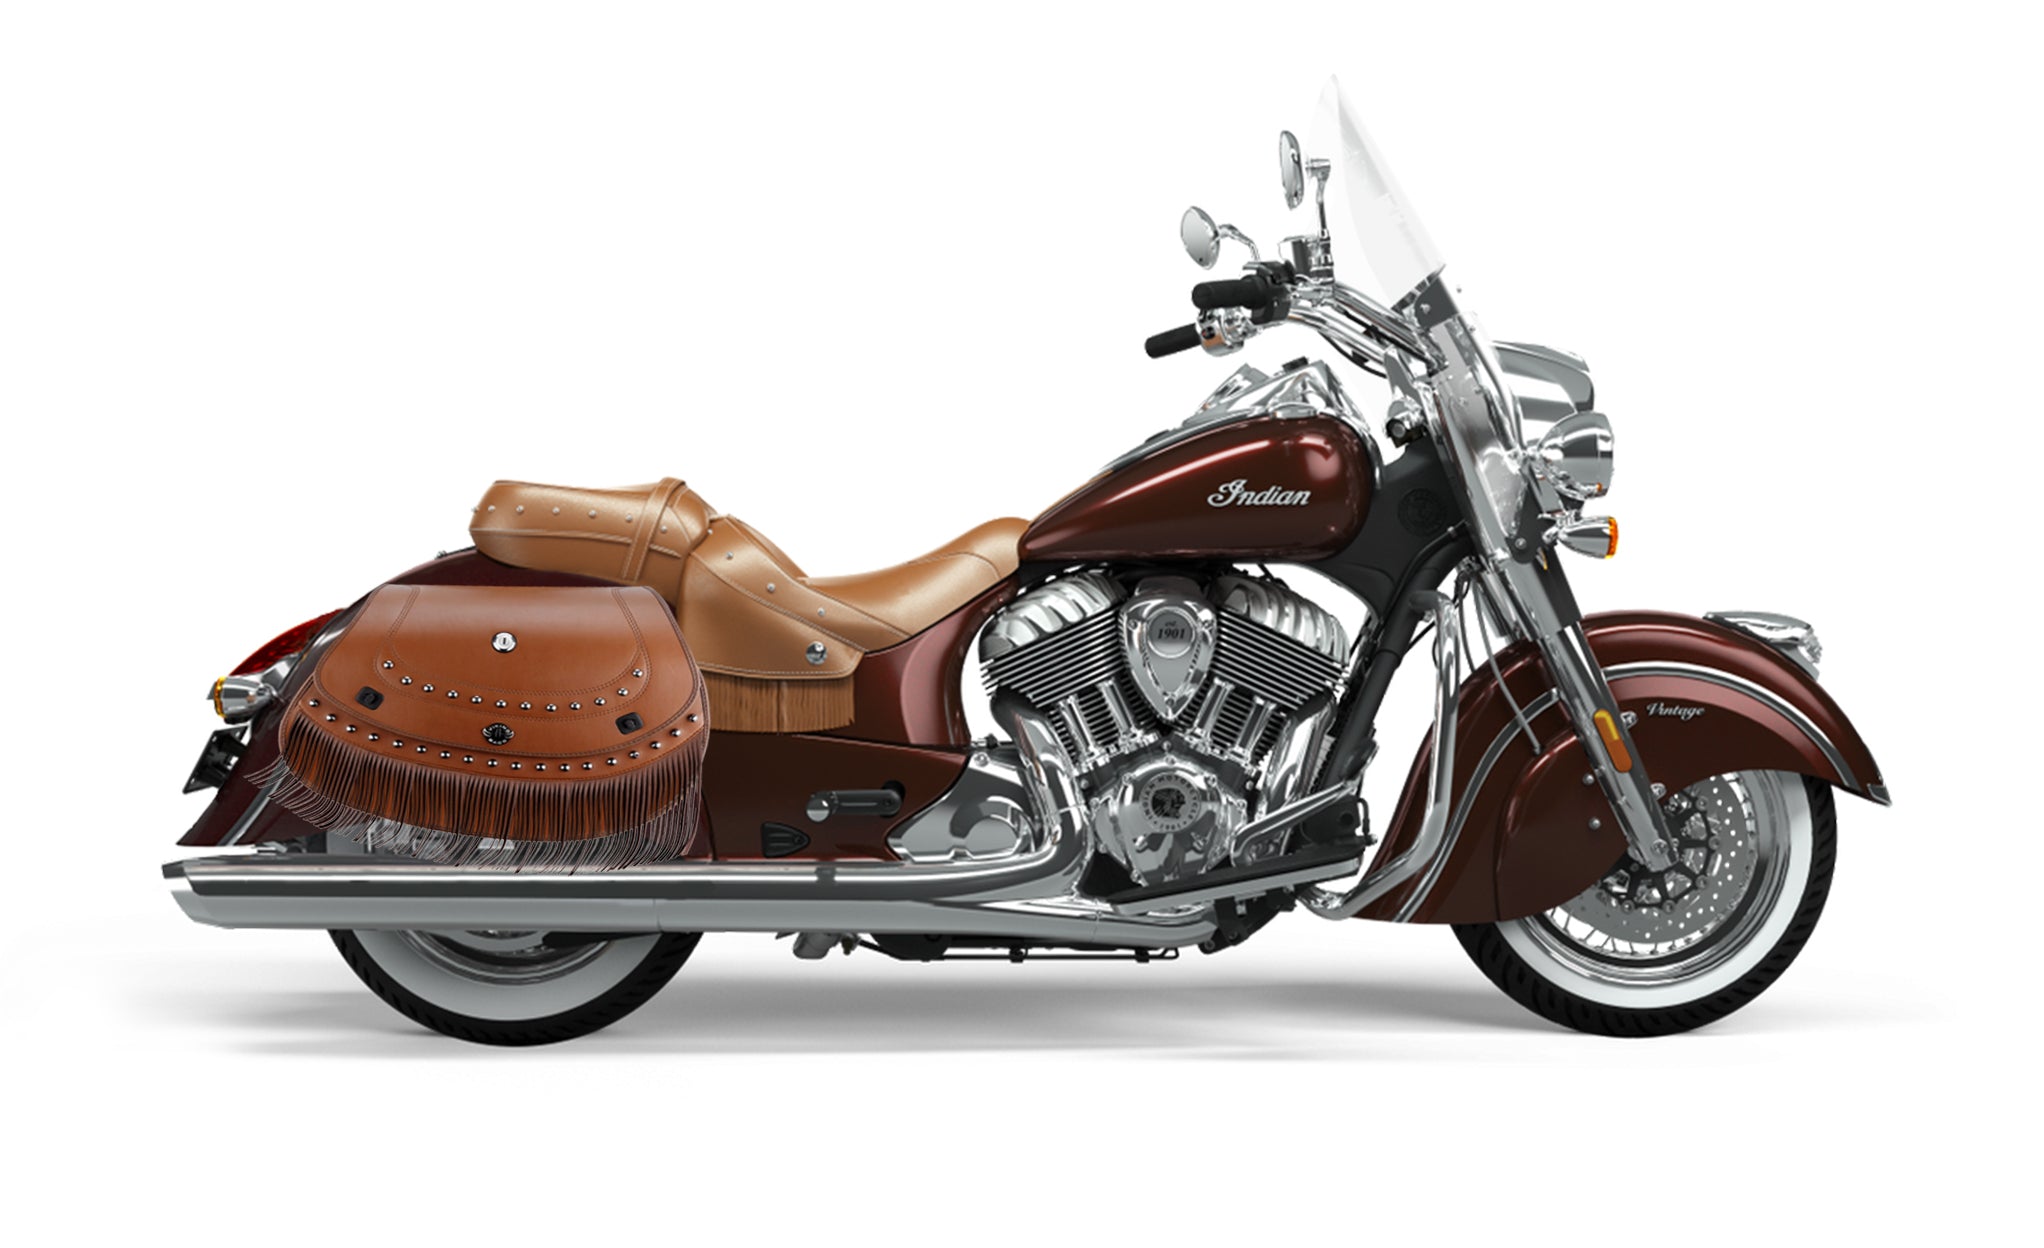 Viking Mohawk Brown Extra Large Indian Vintage Specific Leather Motorcycle Saddlebags on Bike Photo @expand